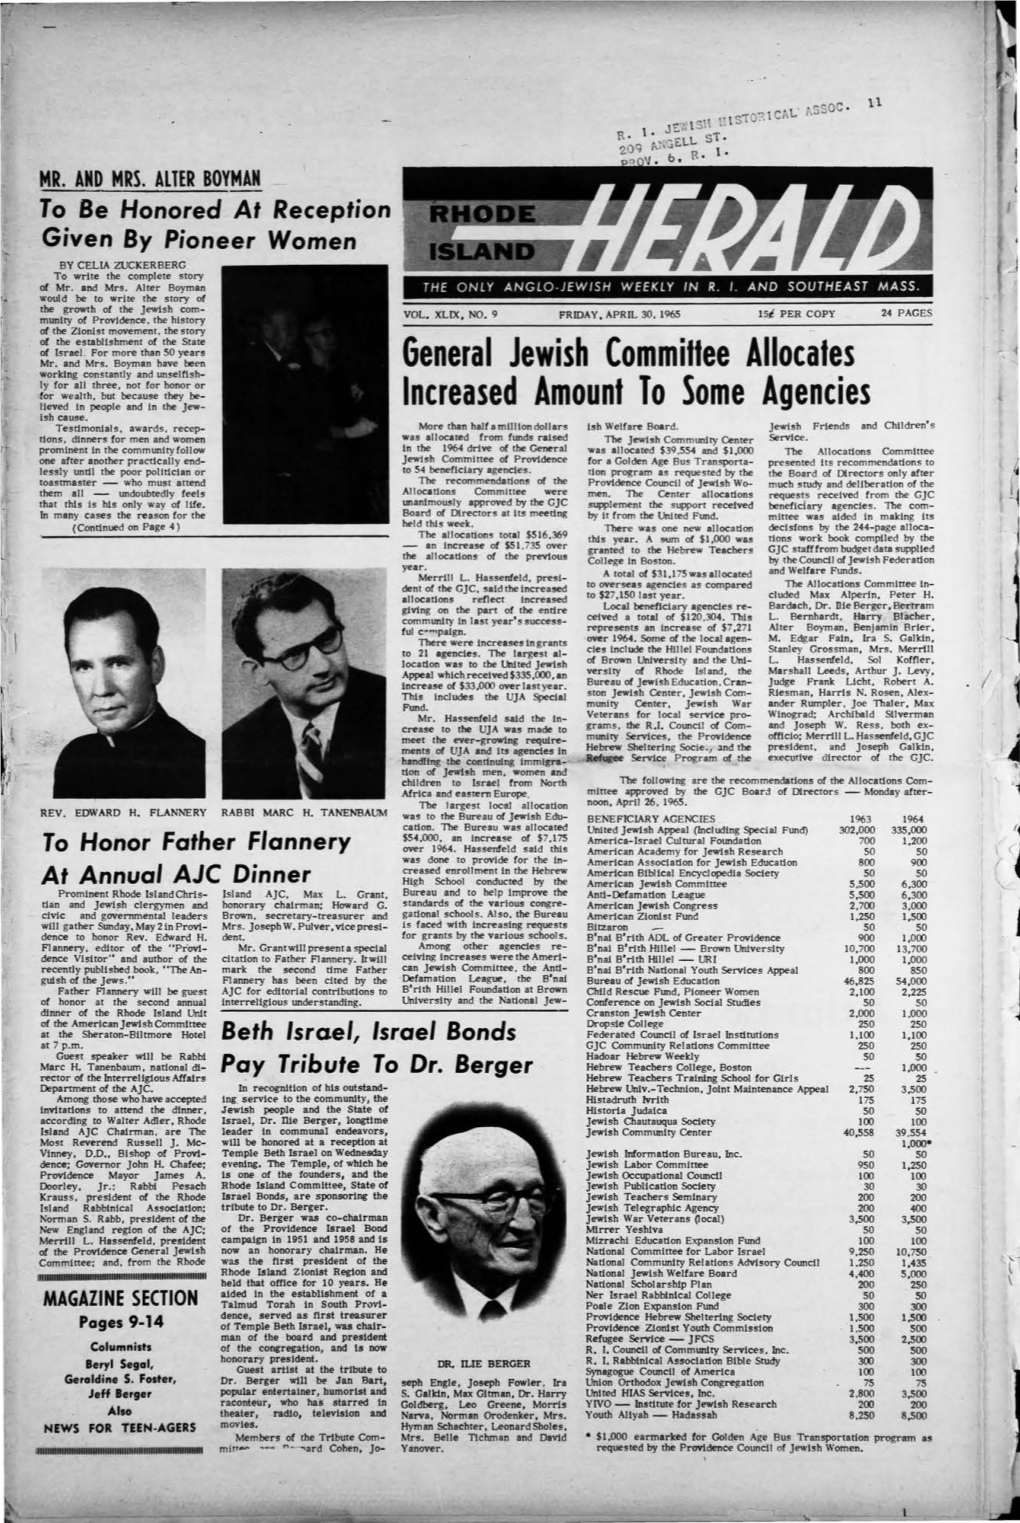 APRIL 30, 1965 of the Zionist Movement, the Story of the Establishment of the State of Israel